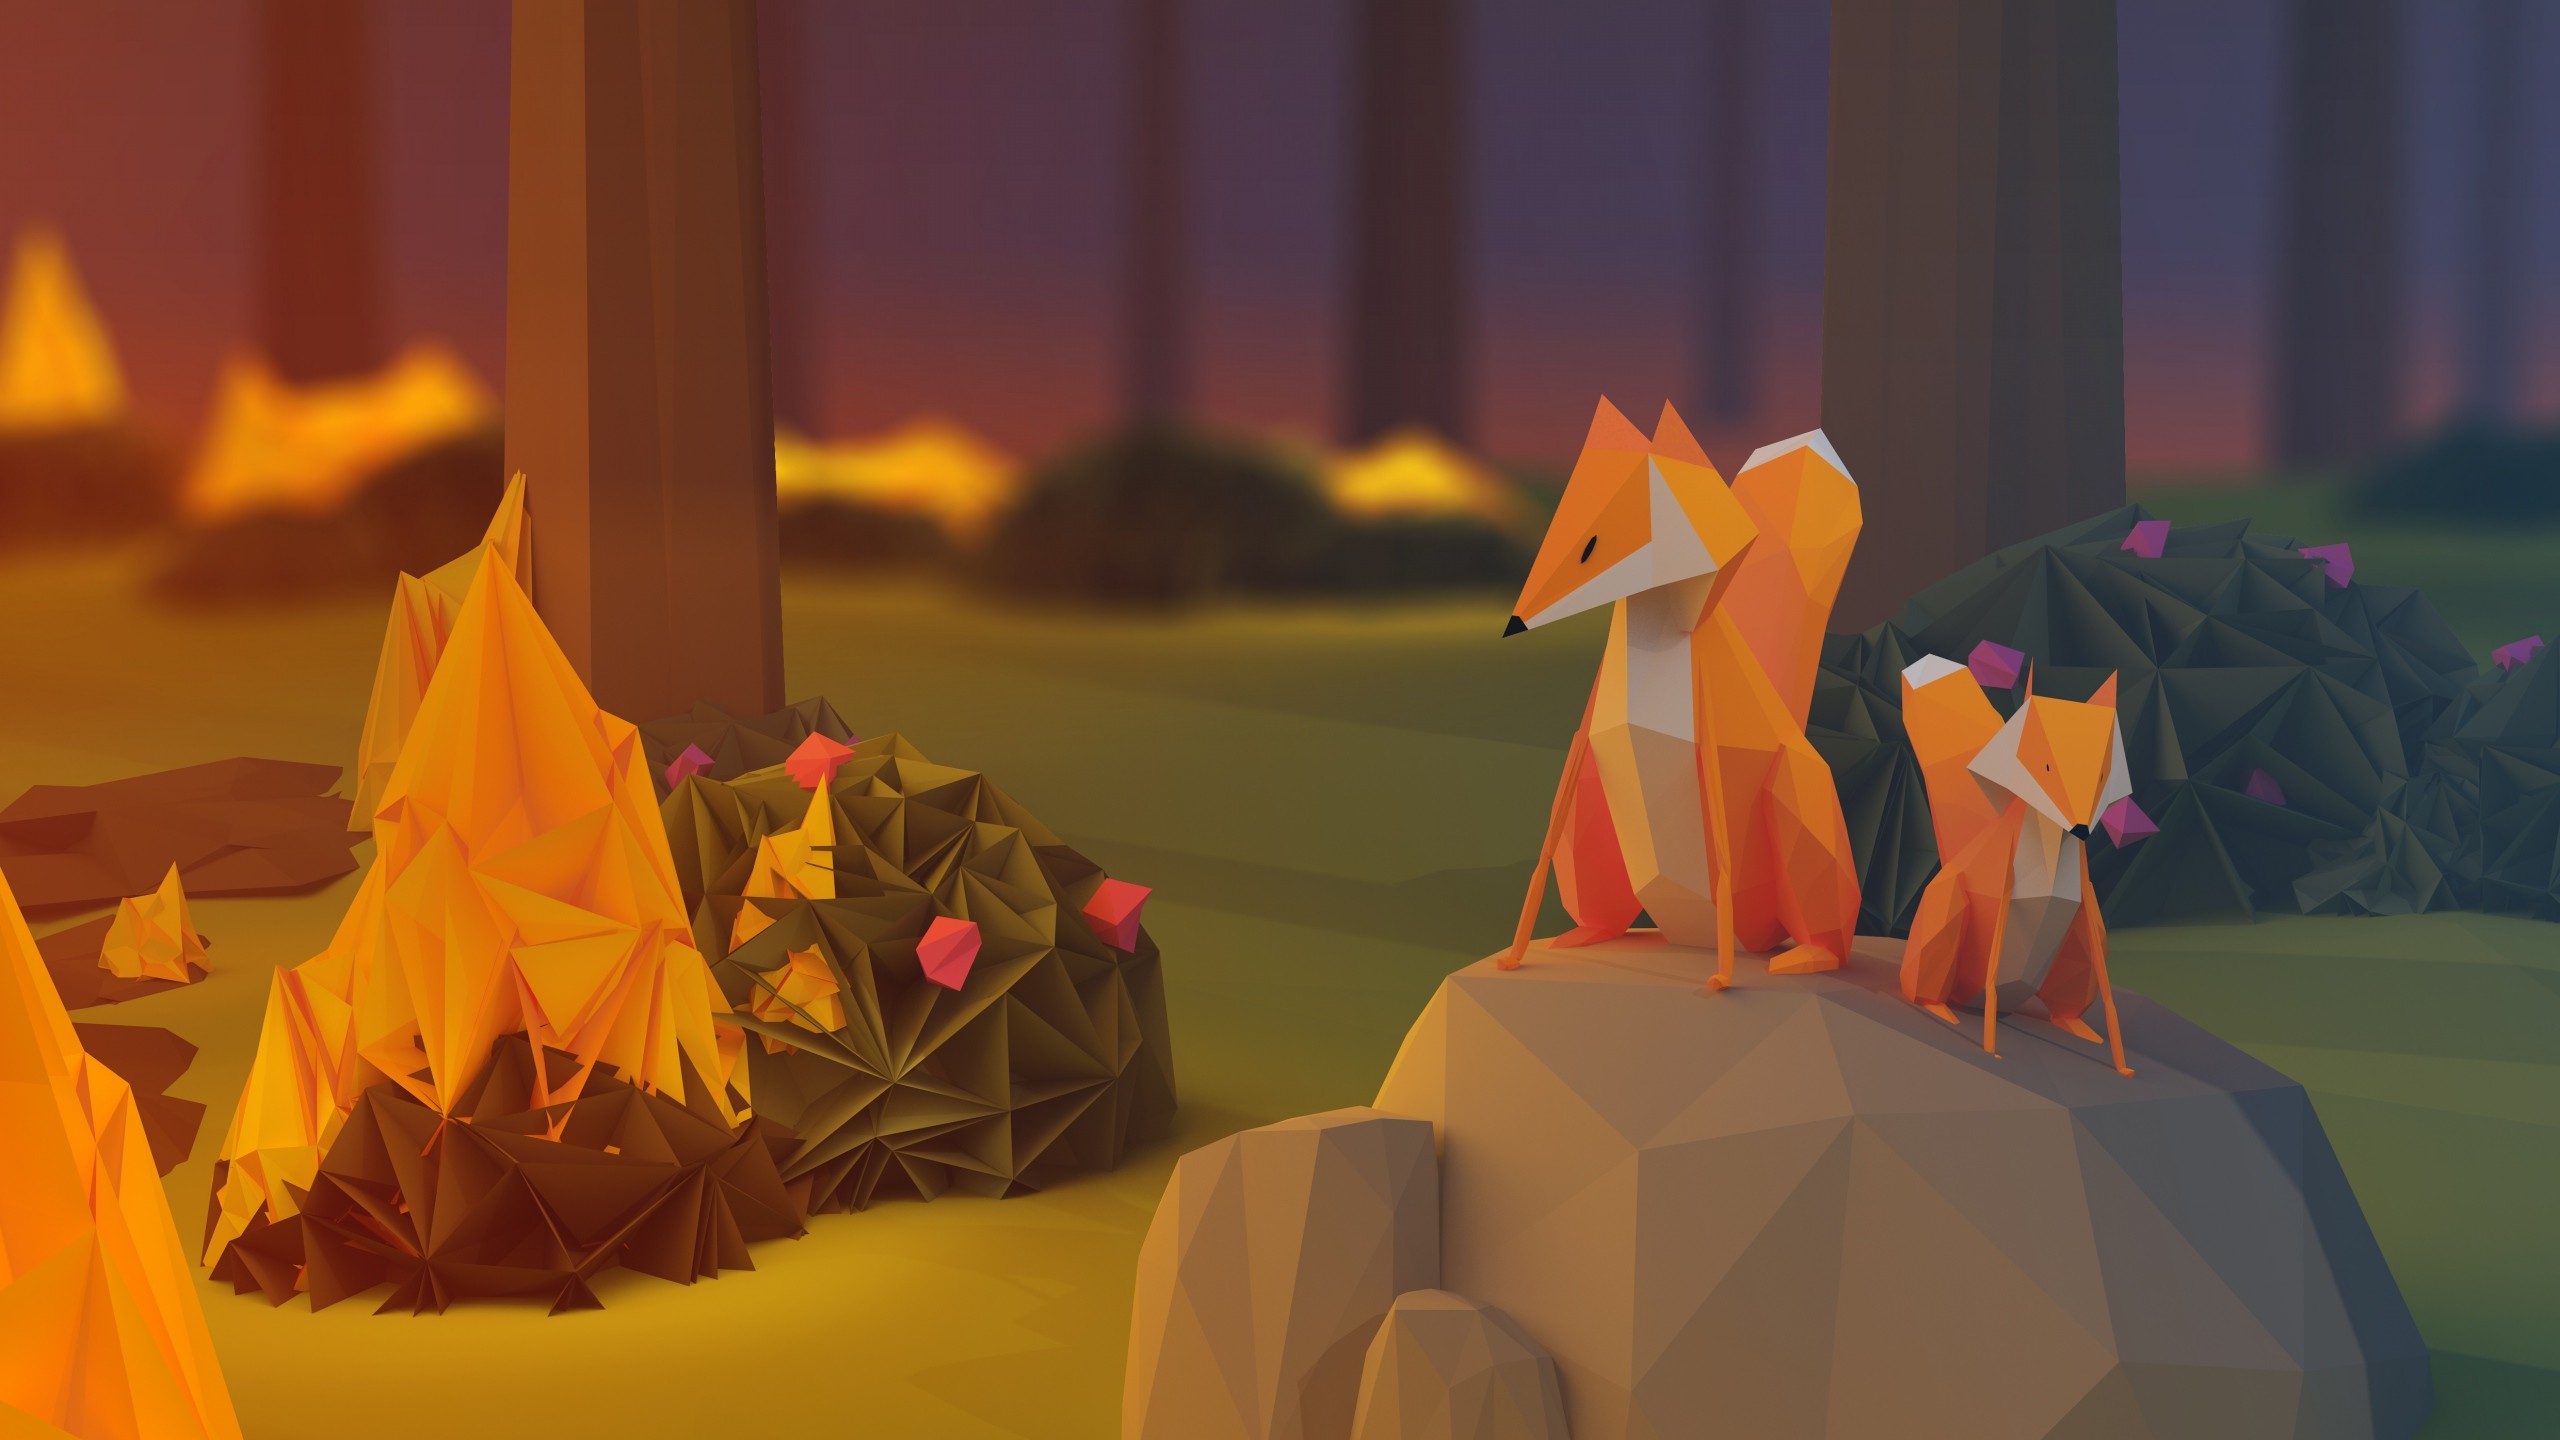 General 2560x1440 paper poly fire nature fox rocks low poly digital art stones plants trees flowers baby animals